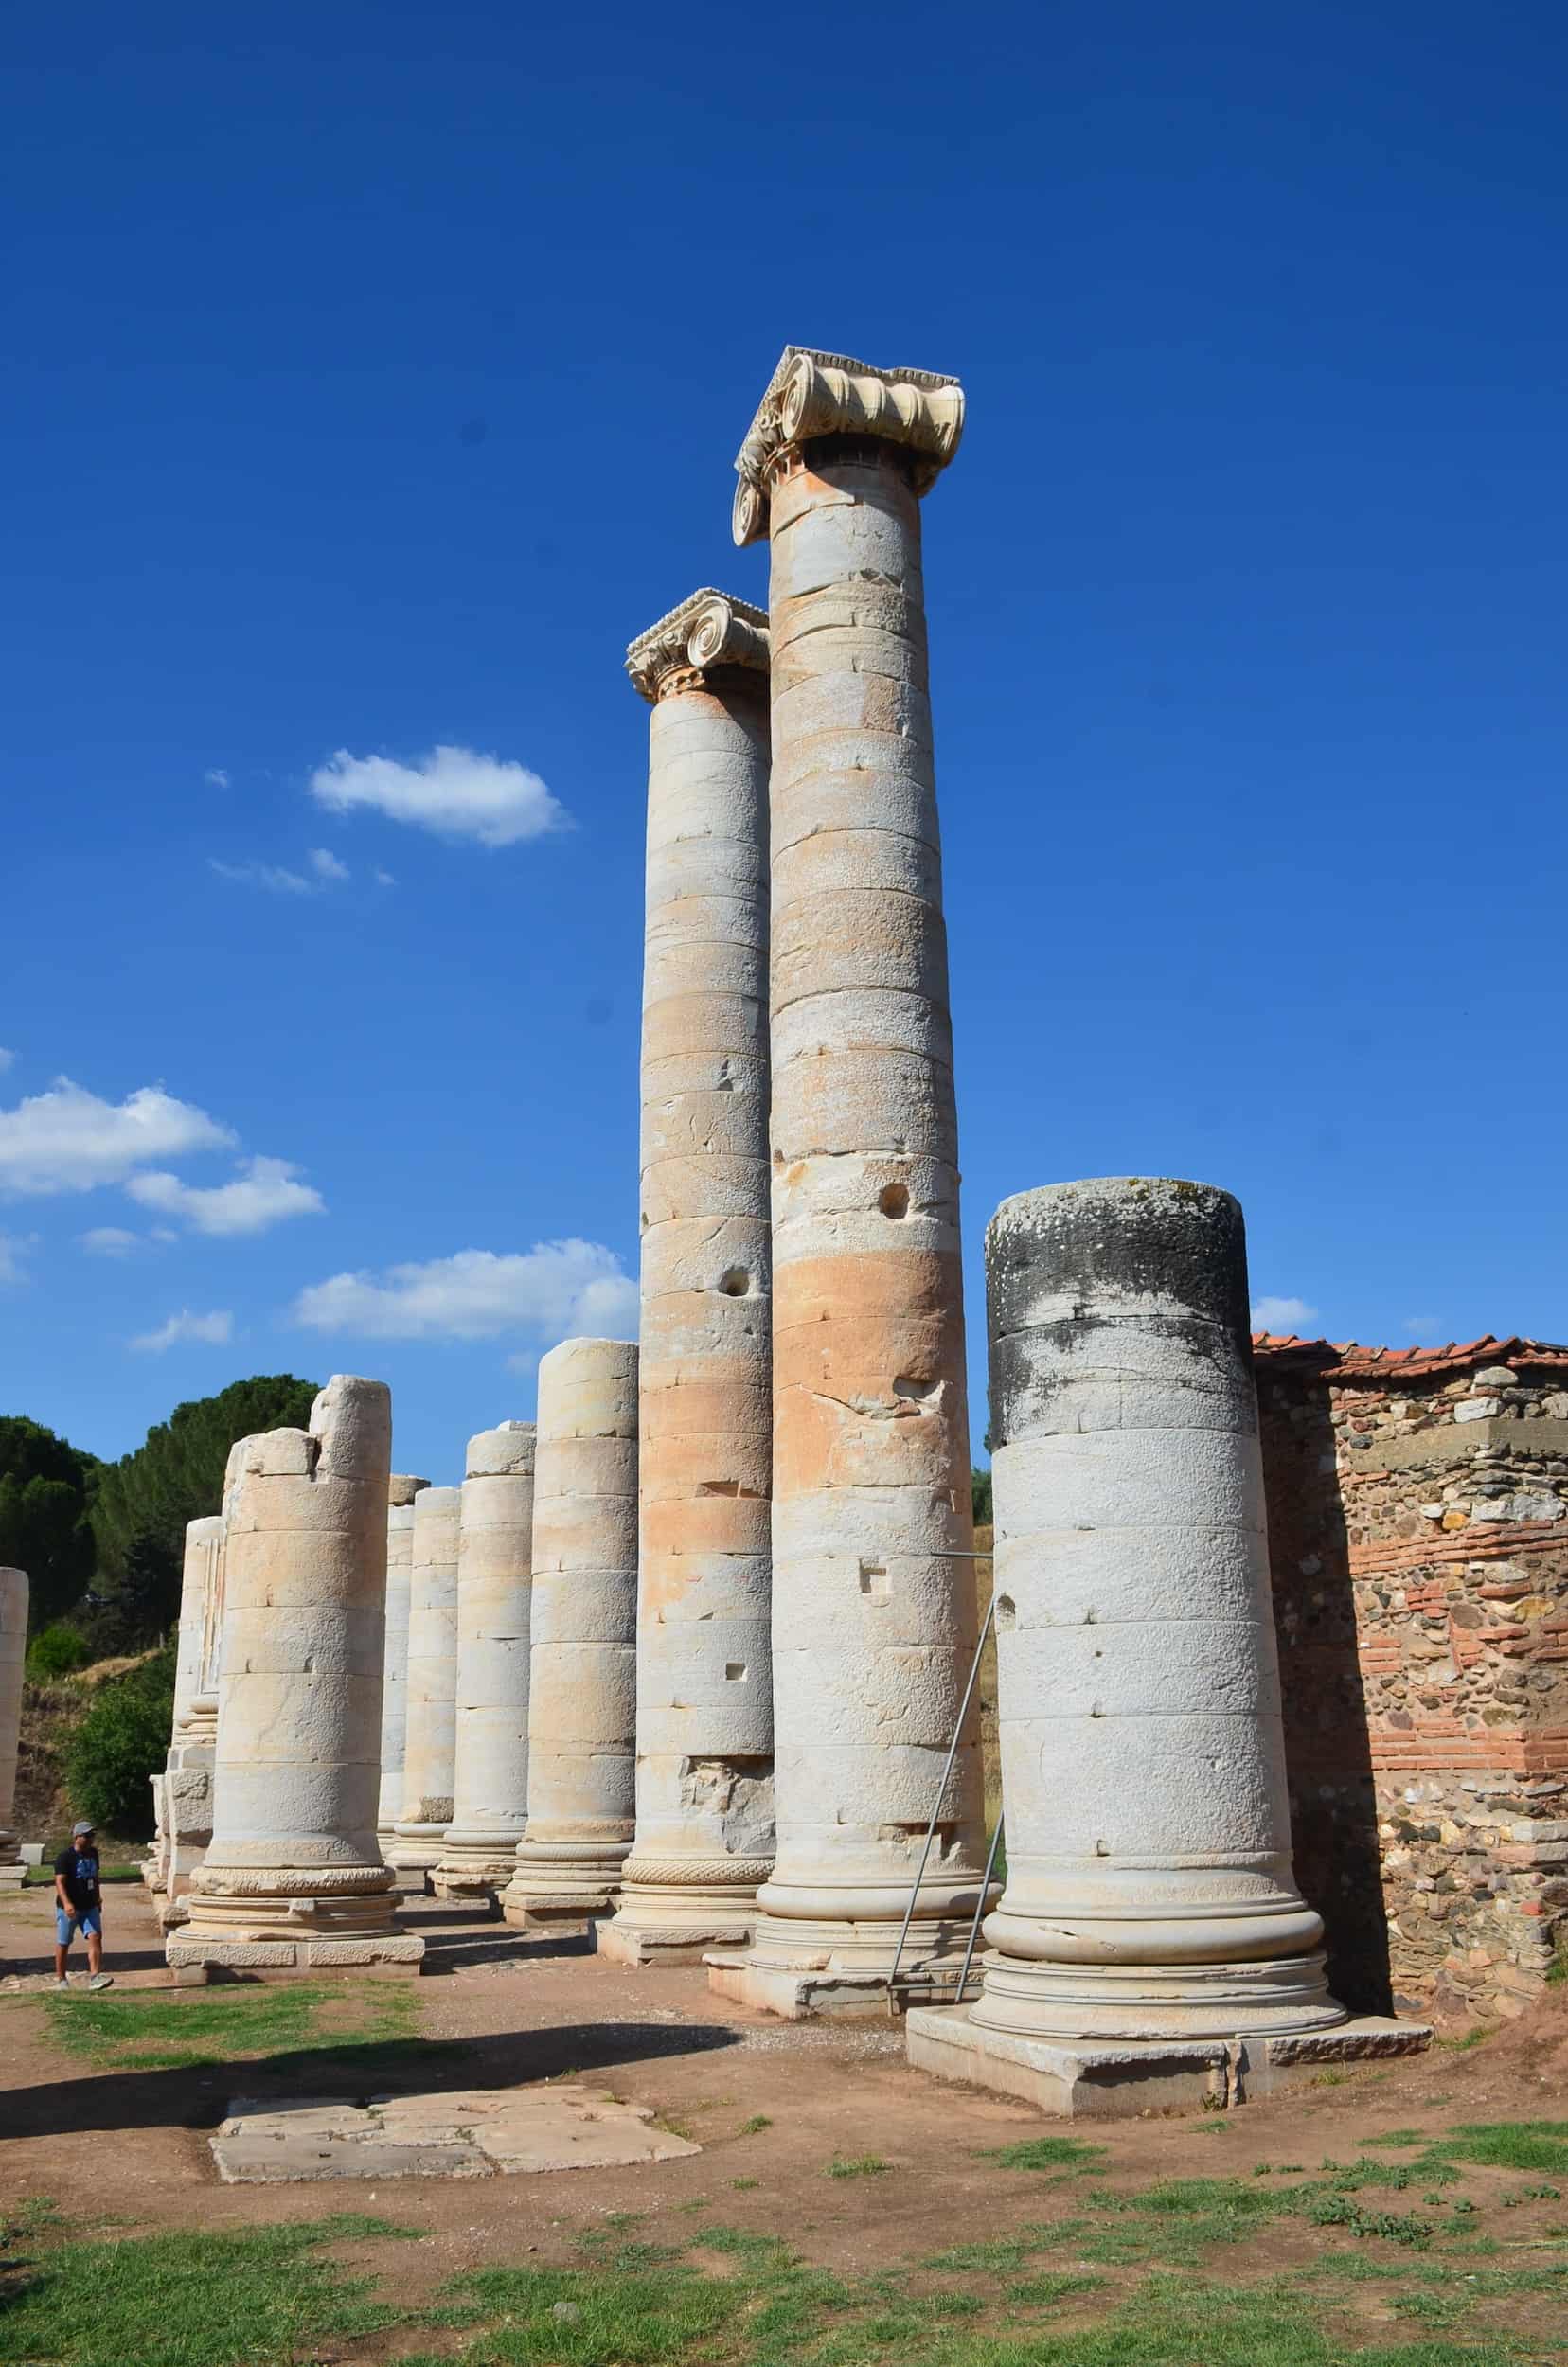 Unfinished colonnade of the Temple of Artemis in Sardis